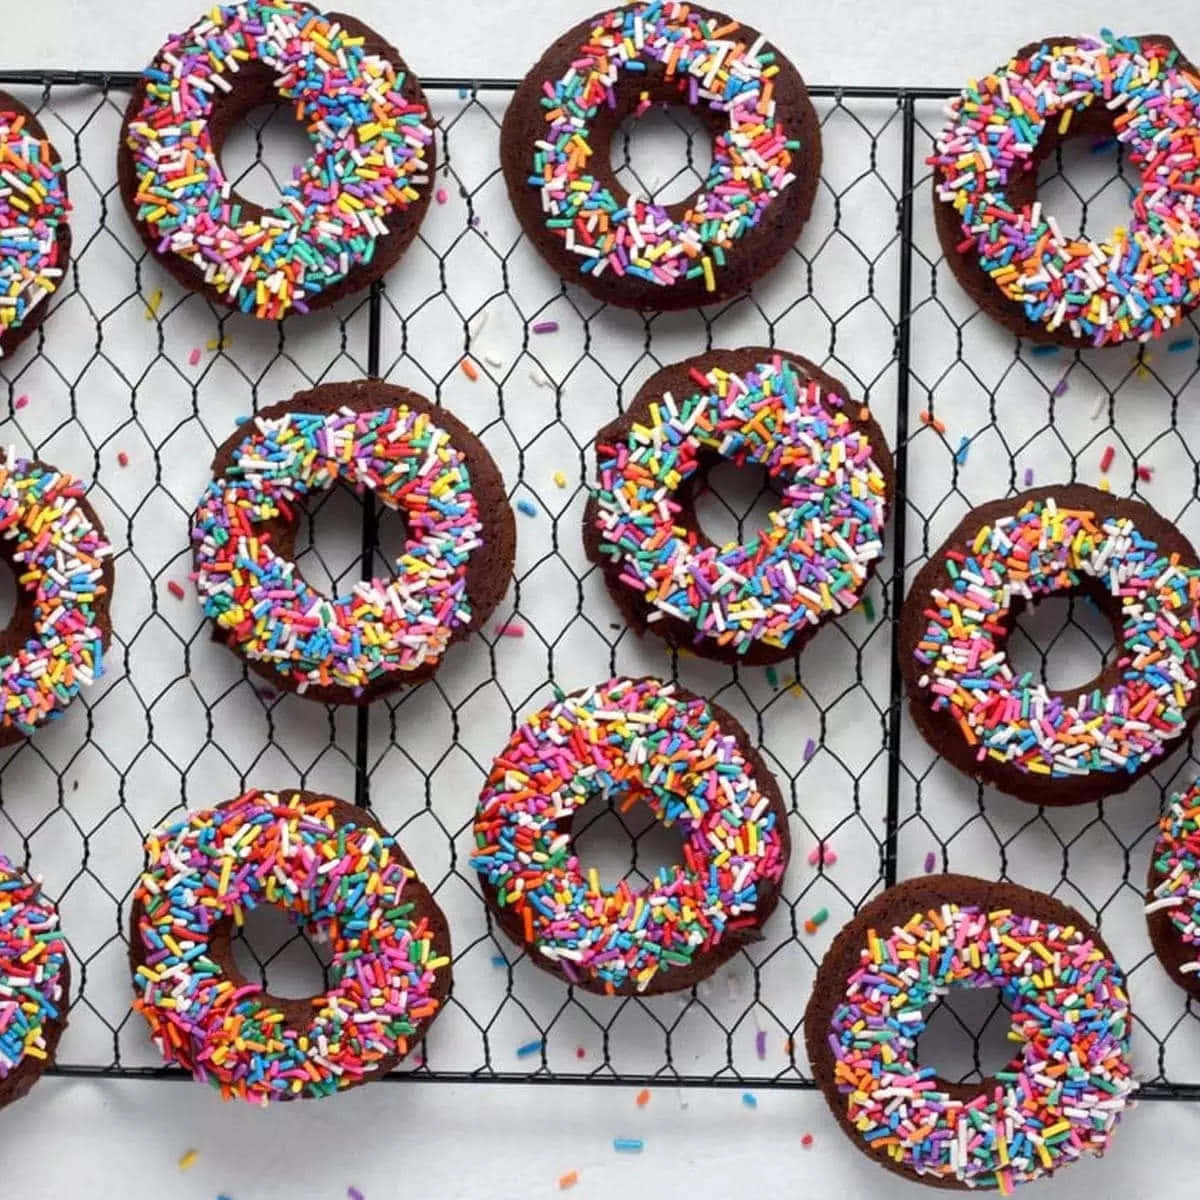 Tasty and Delicious Donuts